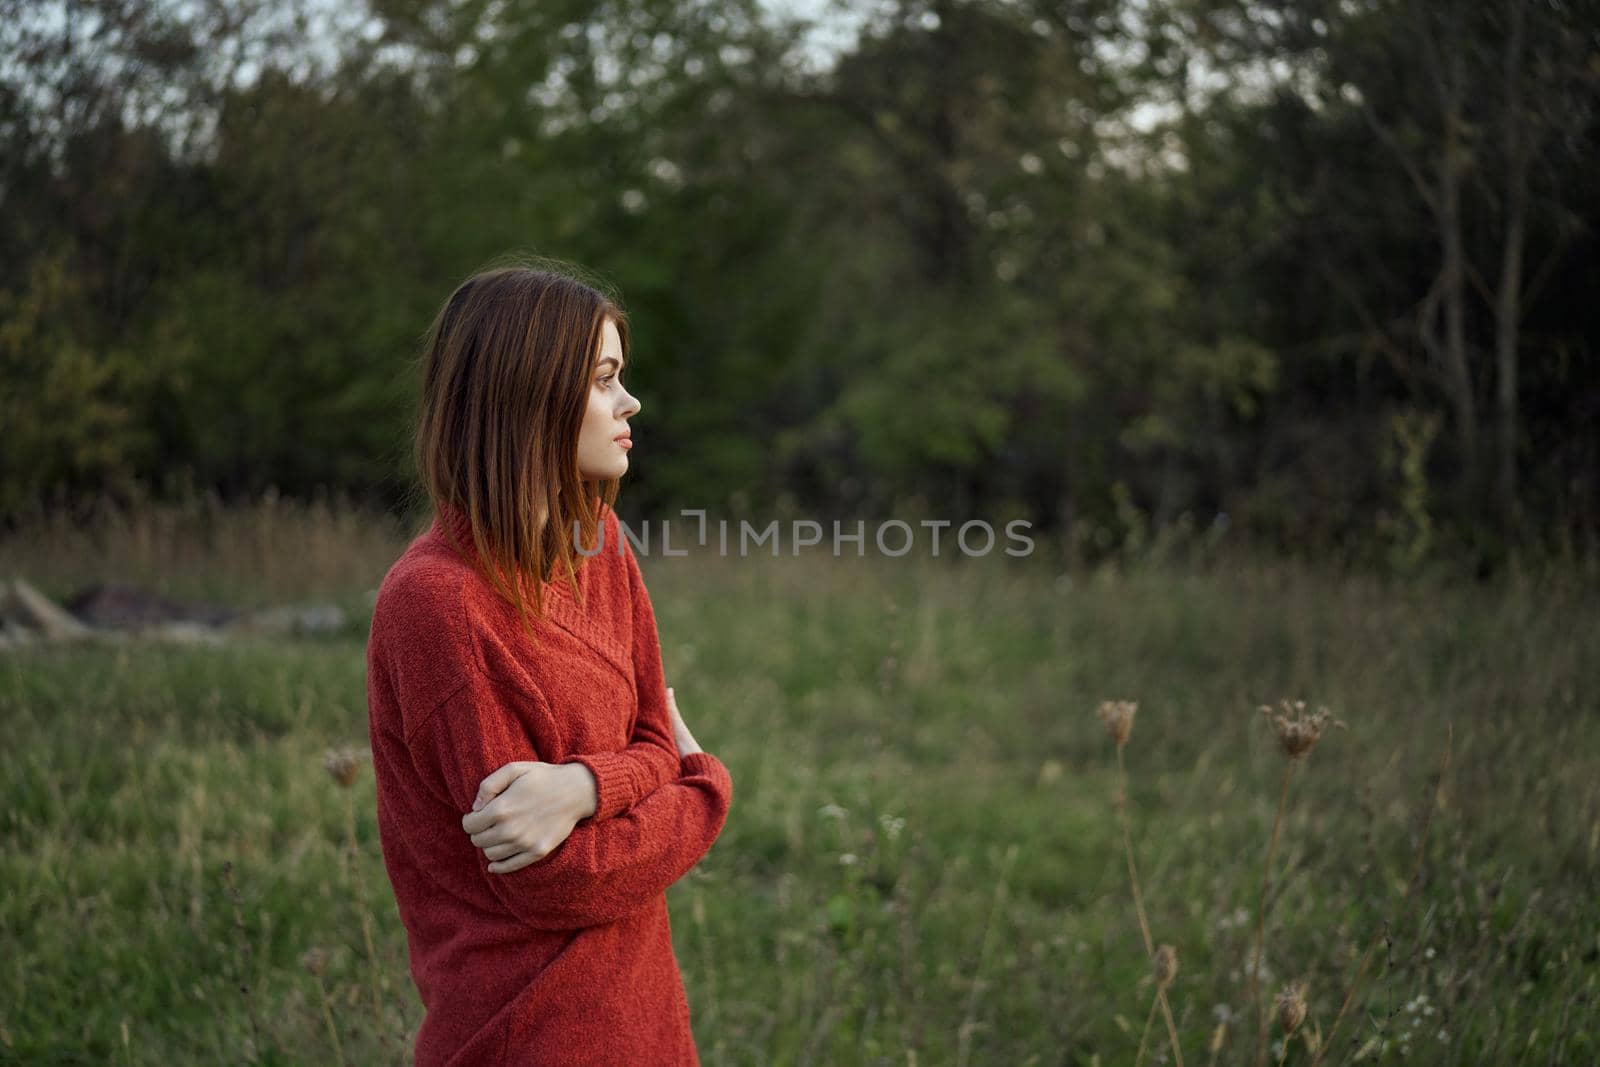 woman in a red sweater outdoors in the field nature rest by Vichizh